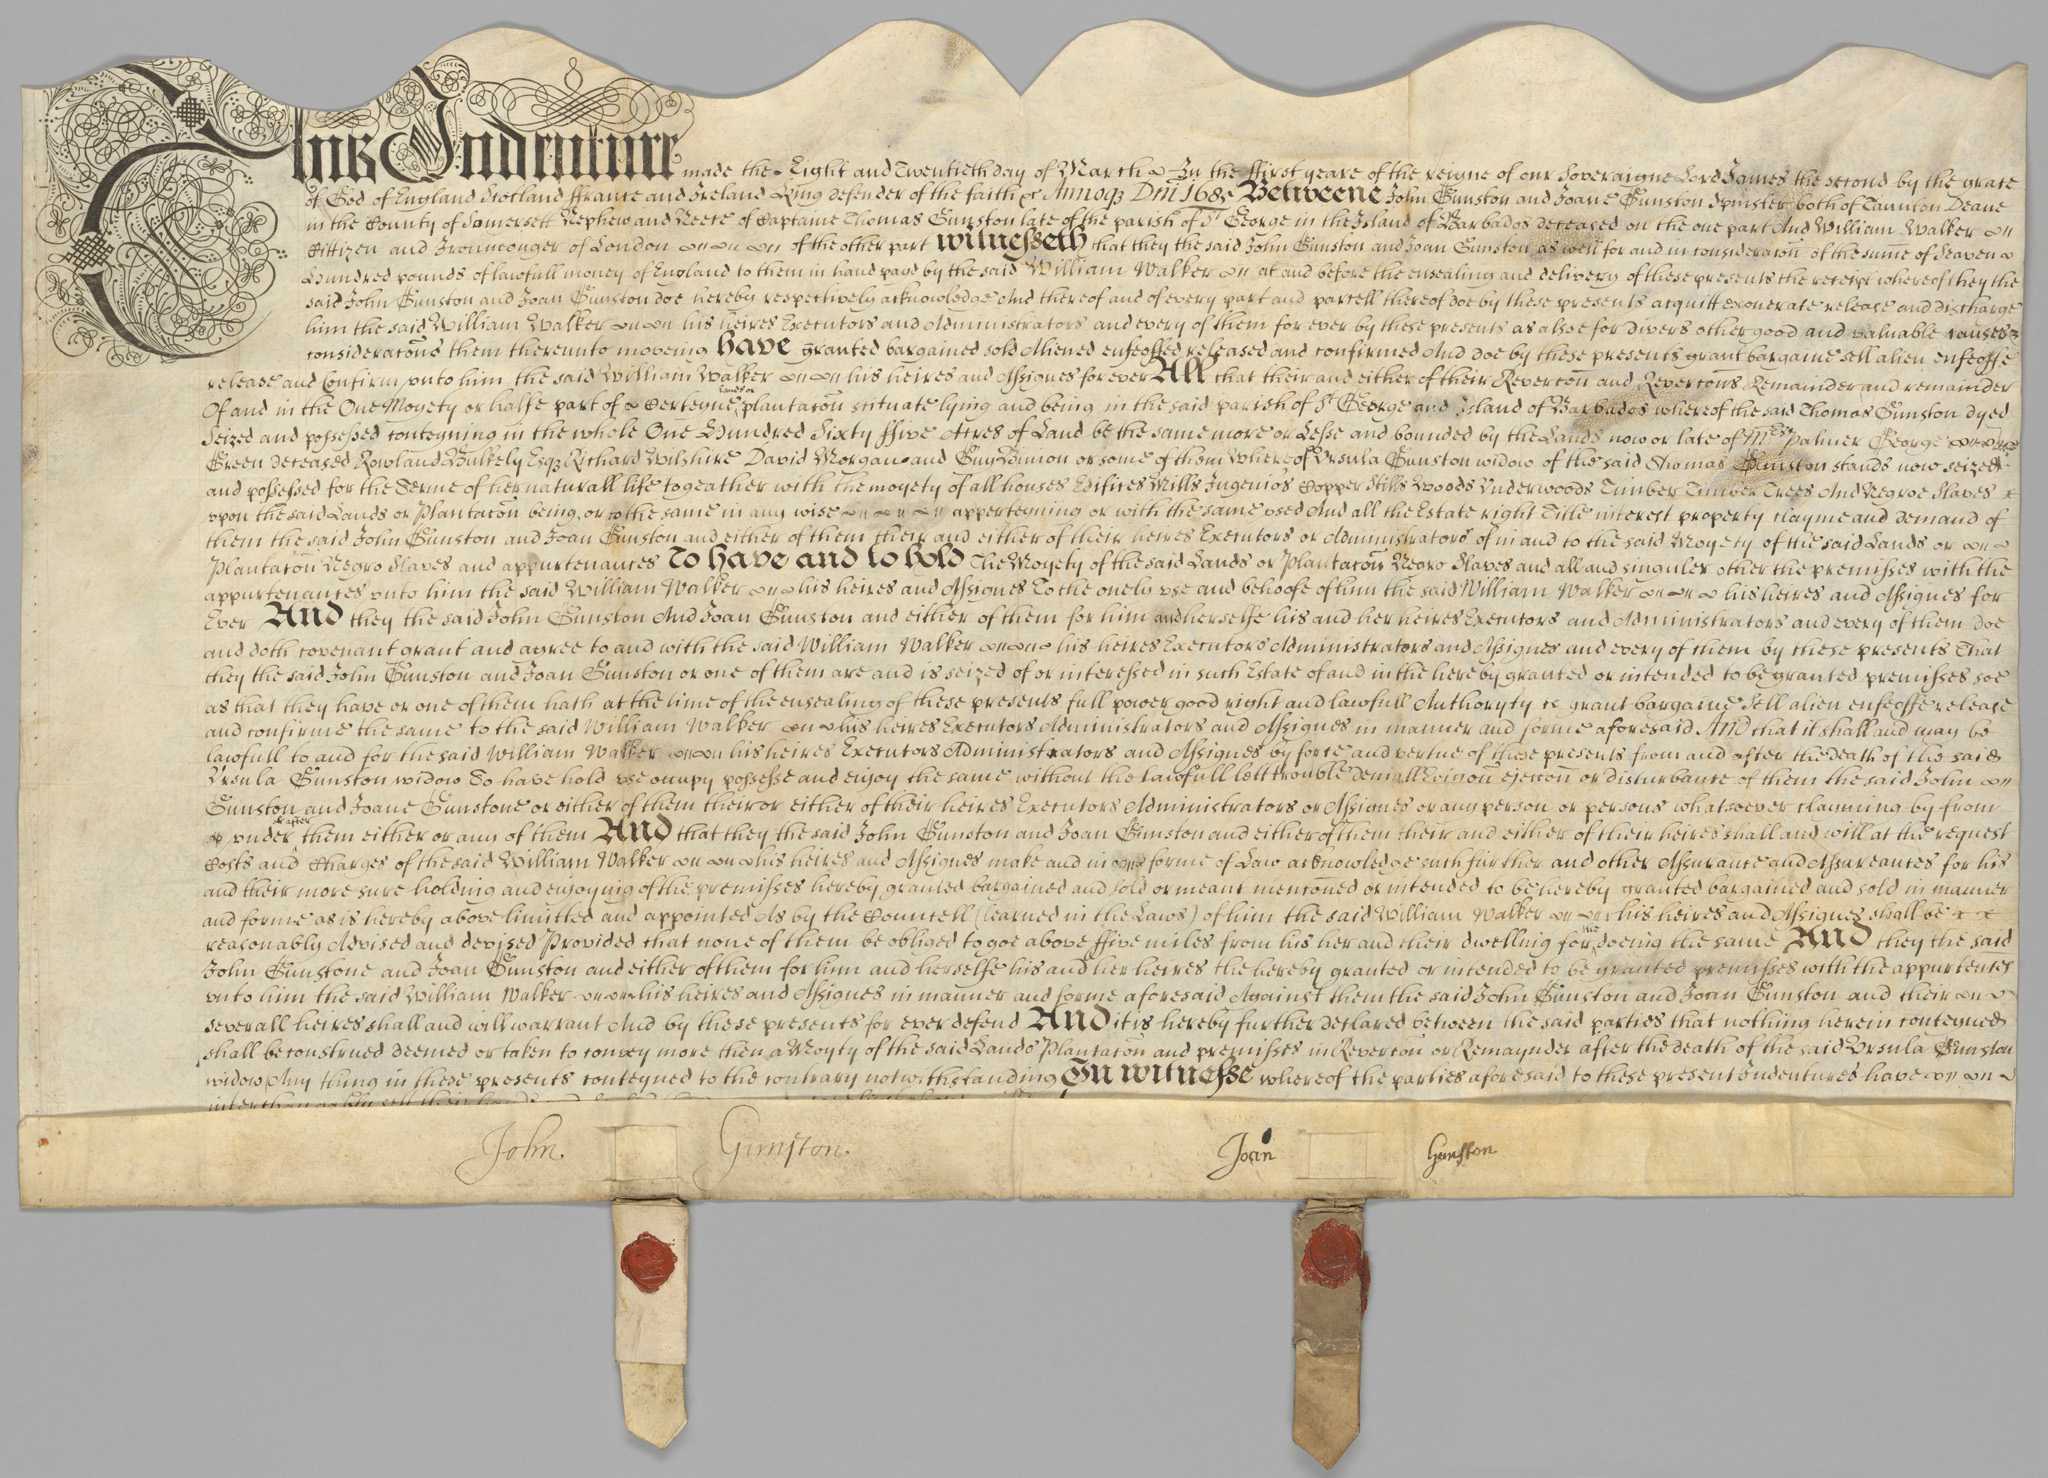 Image of document that passes land and enslaved people to next generation